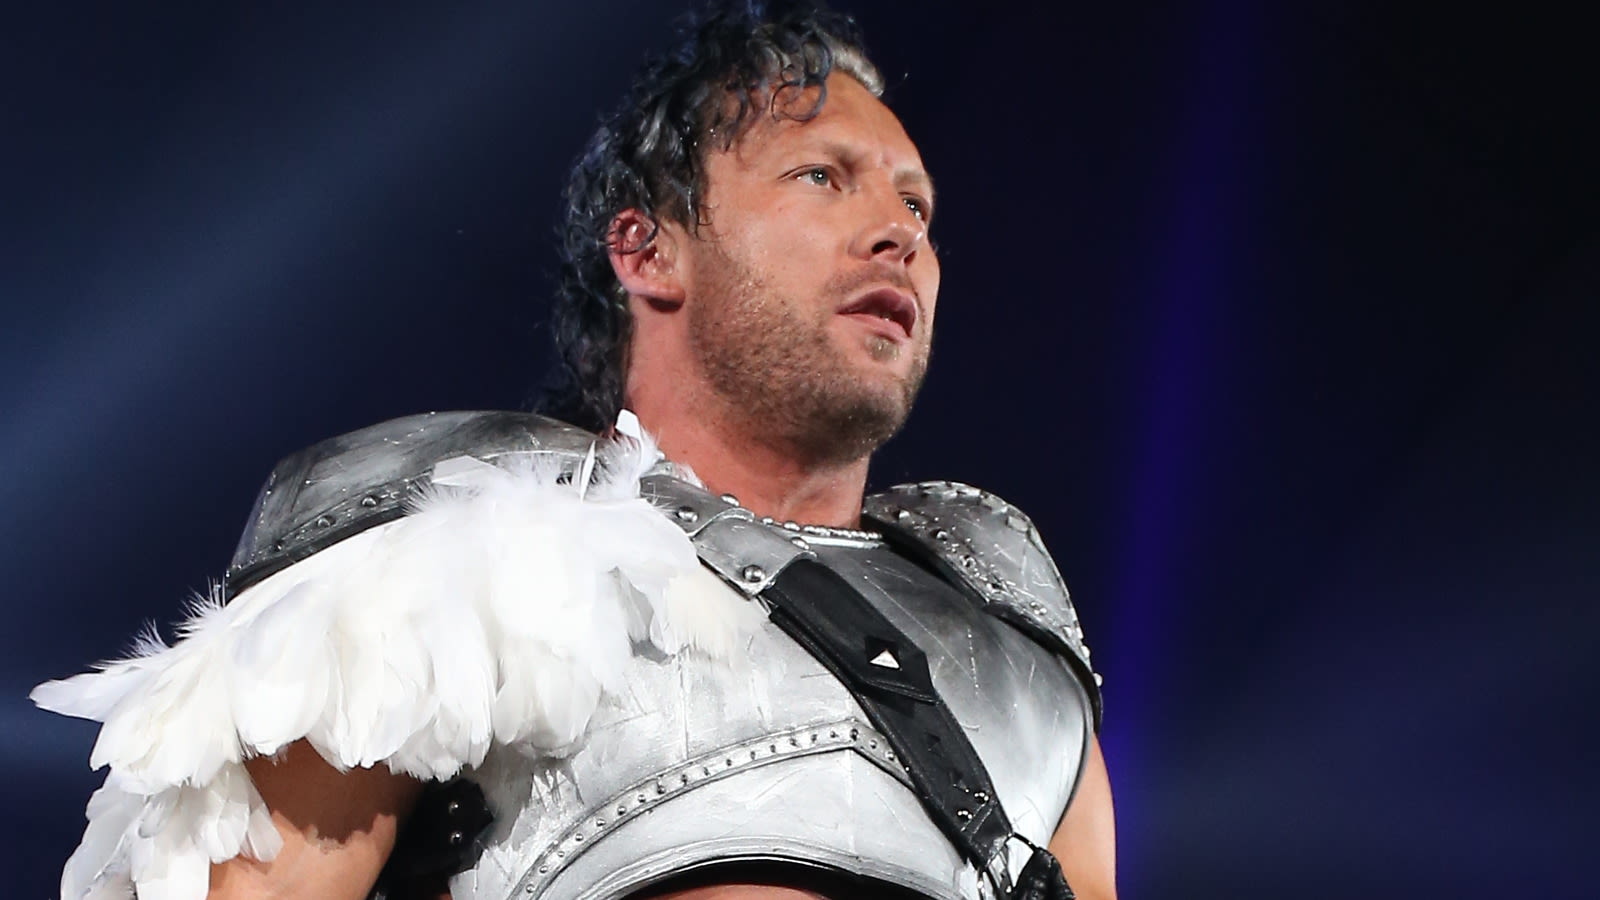 AEW's Kenny Omega Responds To NJPW Star's Callout - Wrestling Inc.